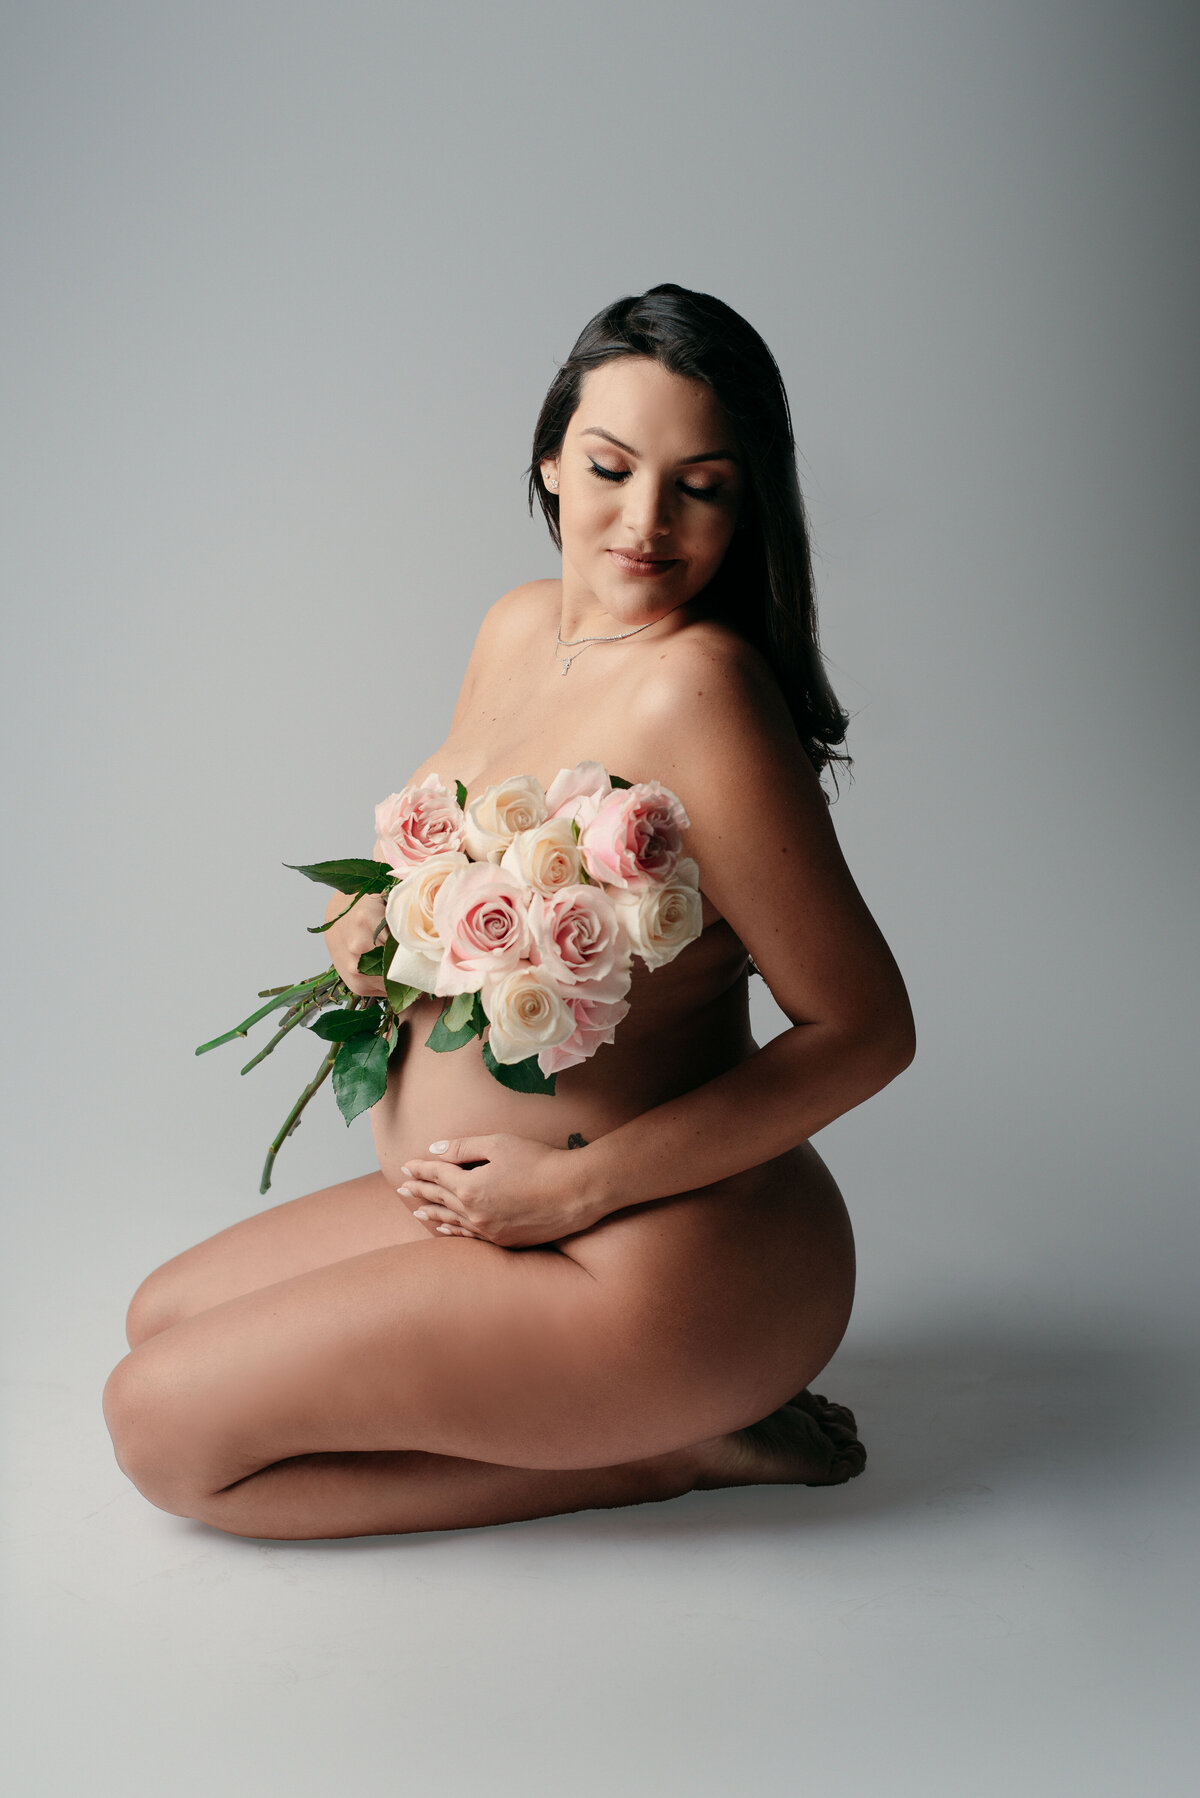 Nude maternity portrait with woman sitting on knees looking over shoulder holding hand on baby bump and holding a bouquet of roses to cover her breast area